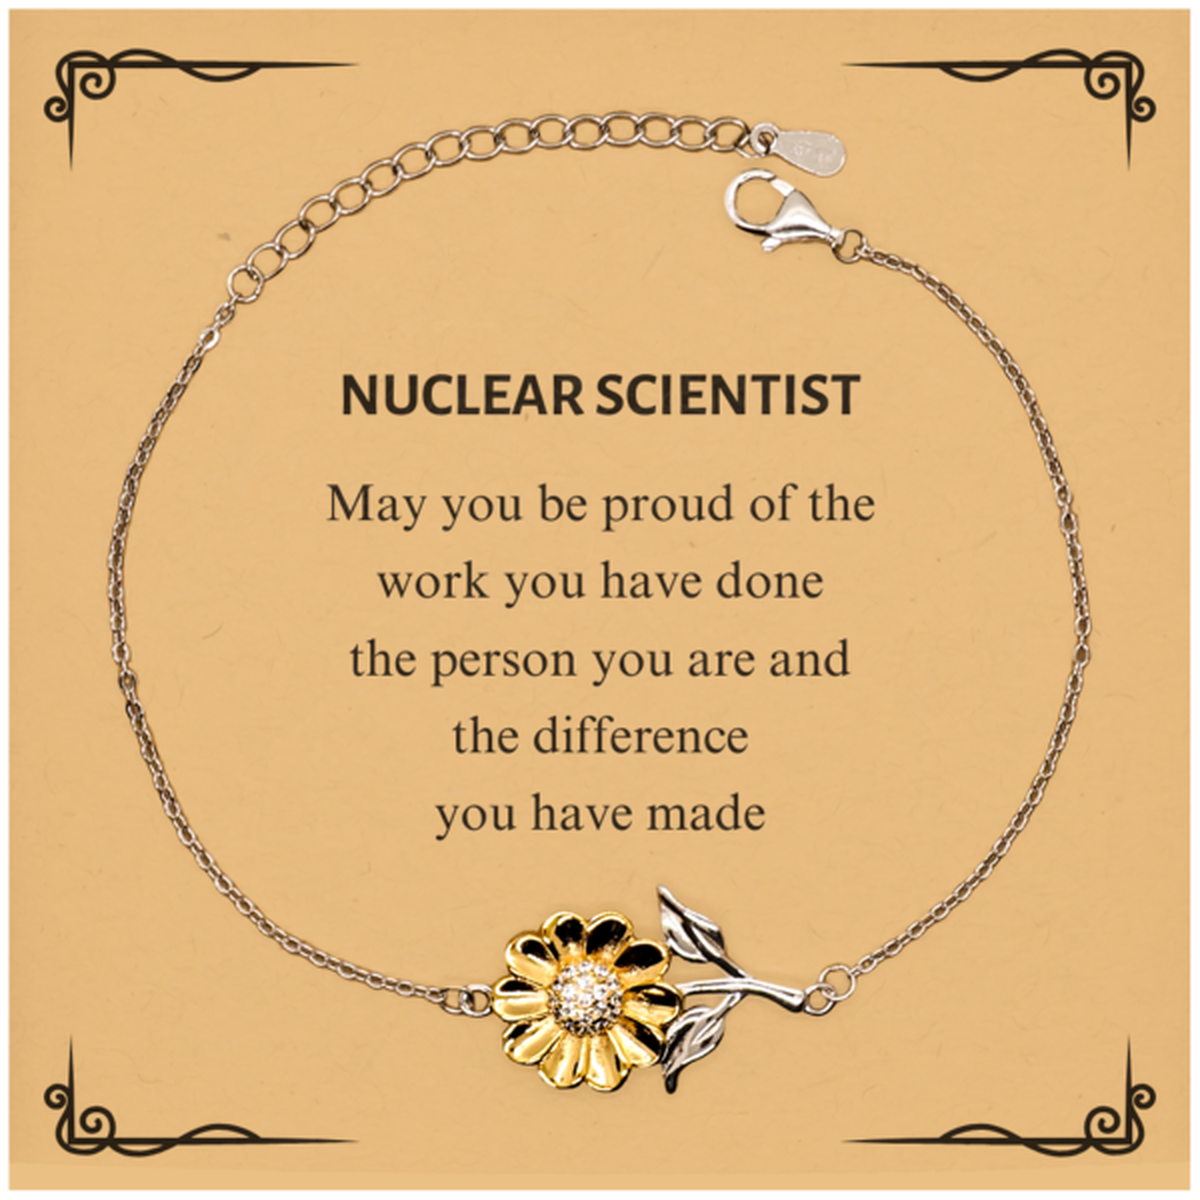 Nuclear Scientist May you be proud of the work you have done, Retirement Nuclear Scientist Sunflower Bracelet for Colleague Appreciation Gifts Amazing for Nuclear Scientist